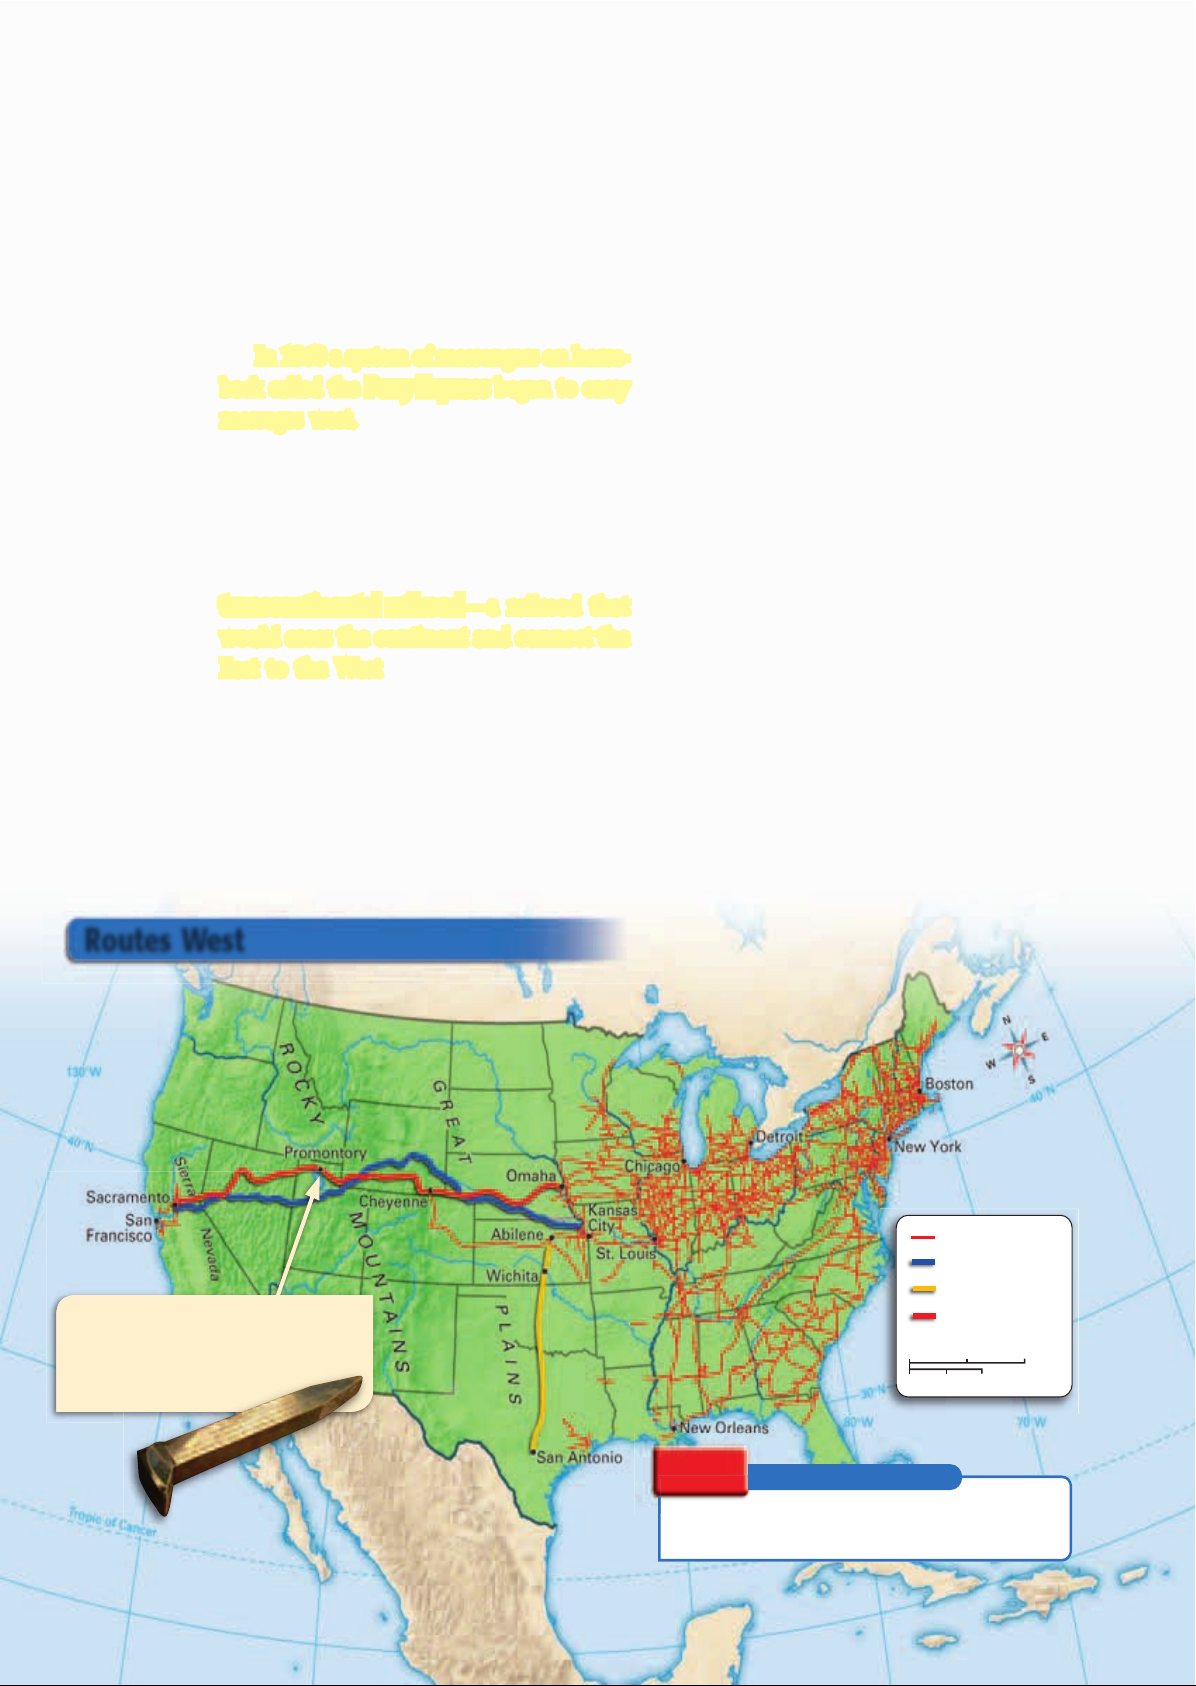 US_History_Textbook_8th_Grade_Chapter_17_Americans_Move_West_F2oKcnl Image-6